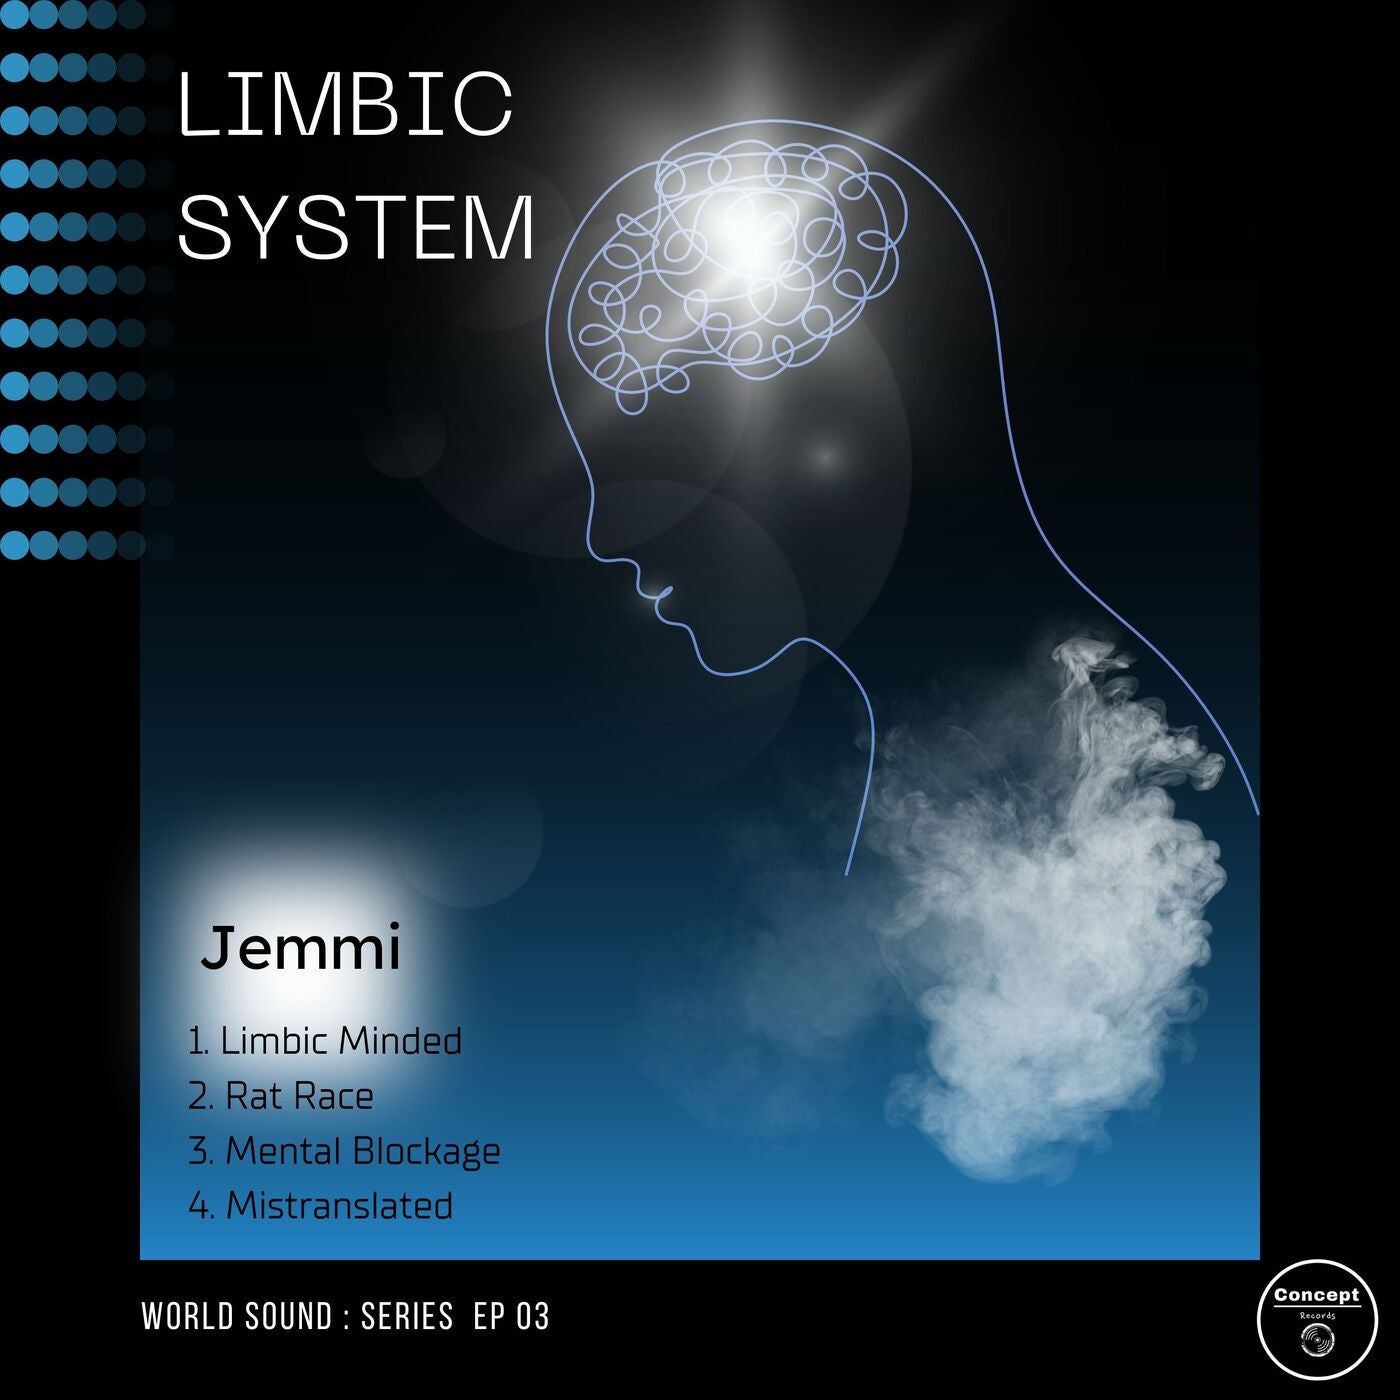 World Sound: Series 03 Lymbic System